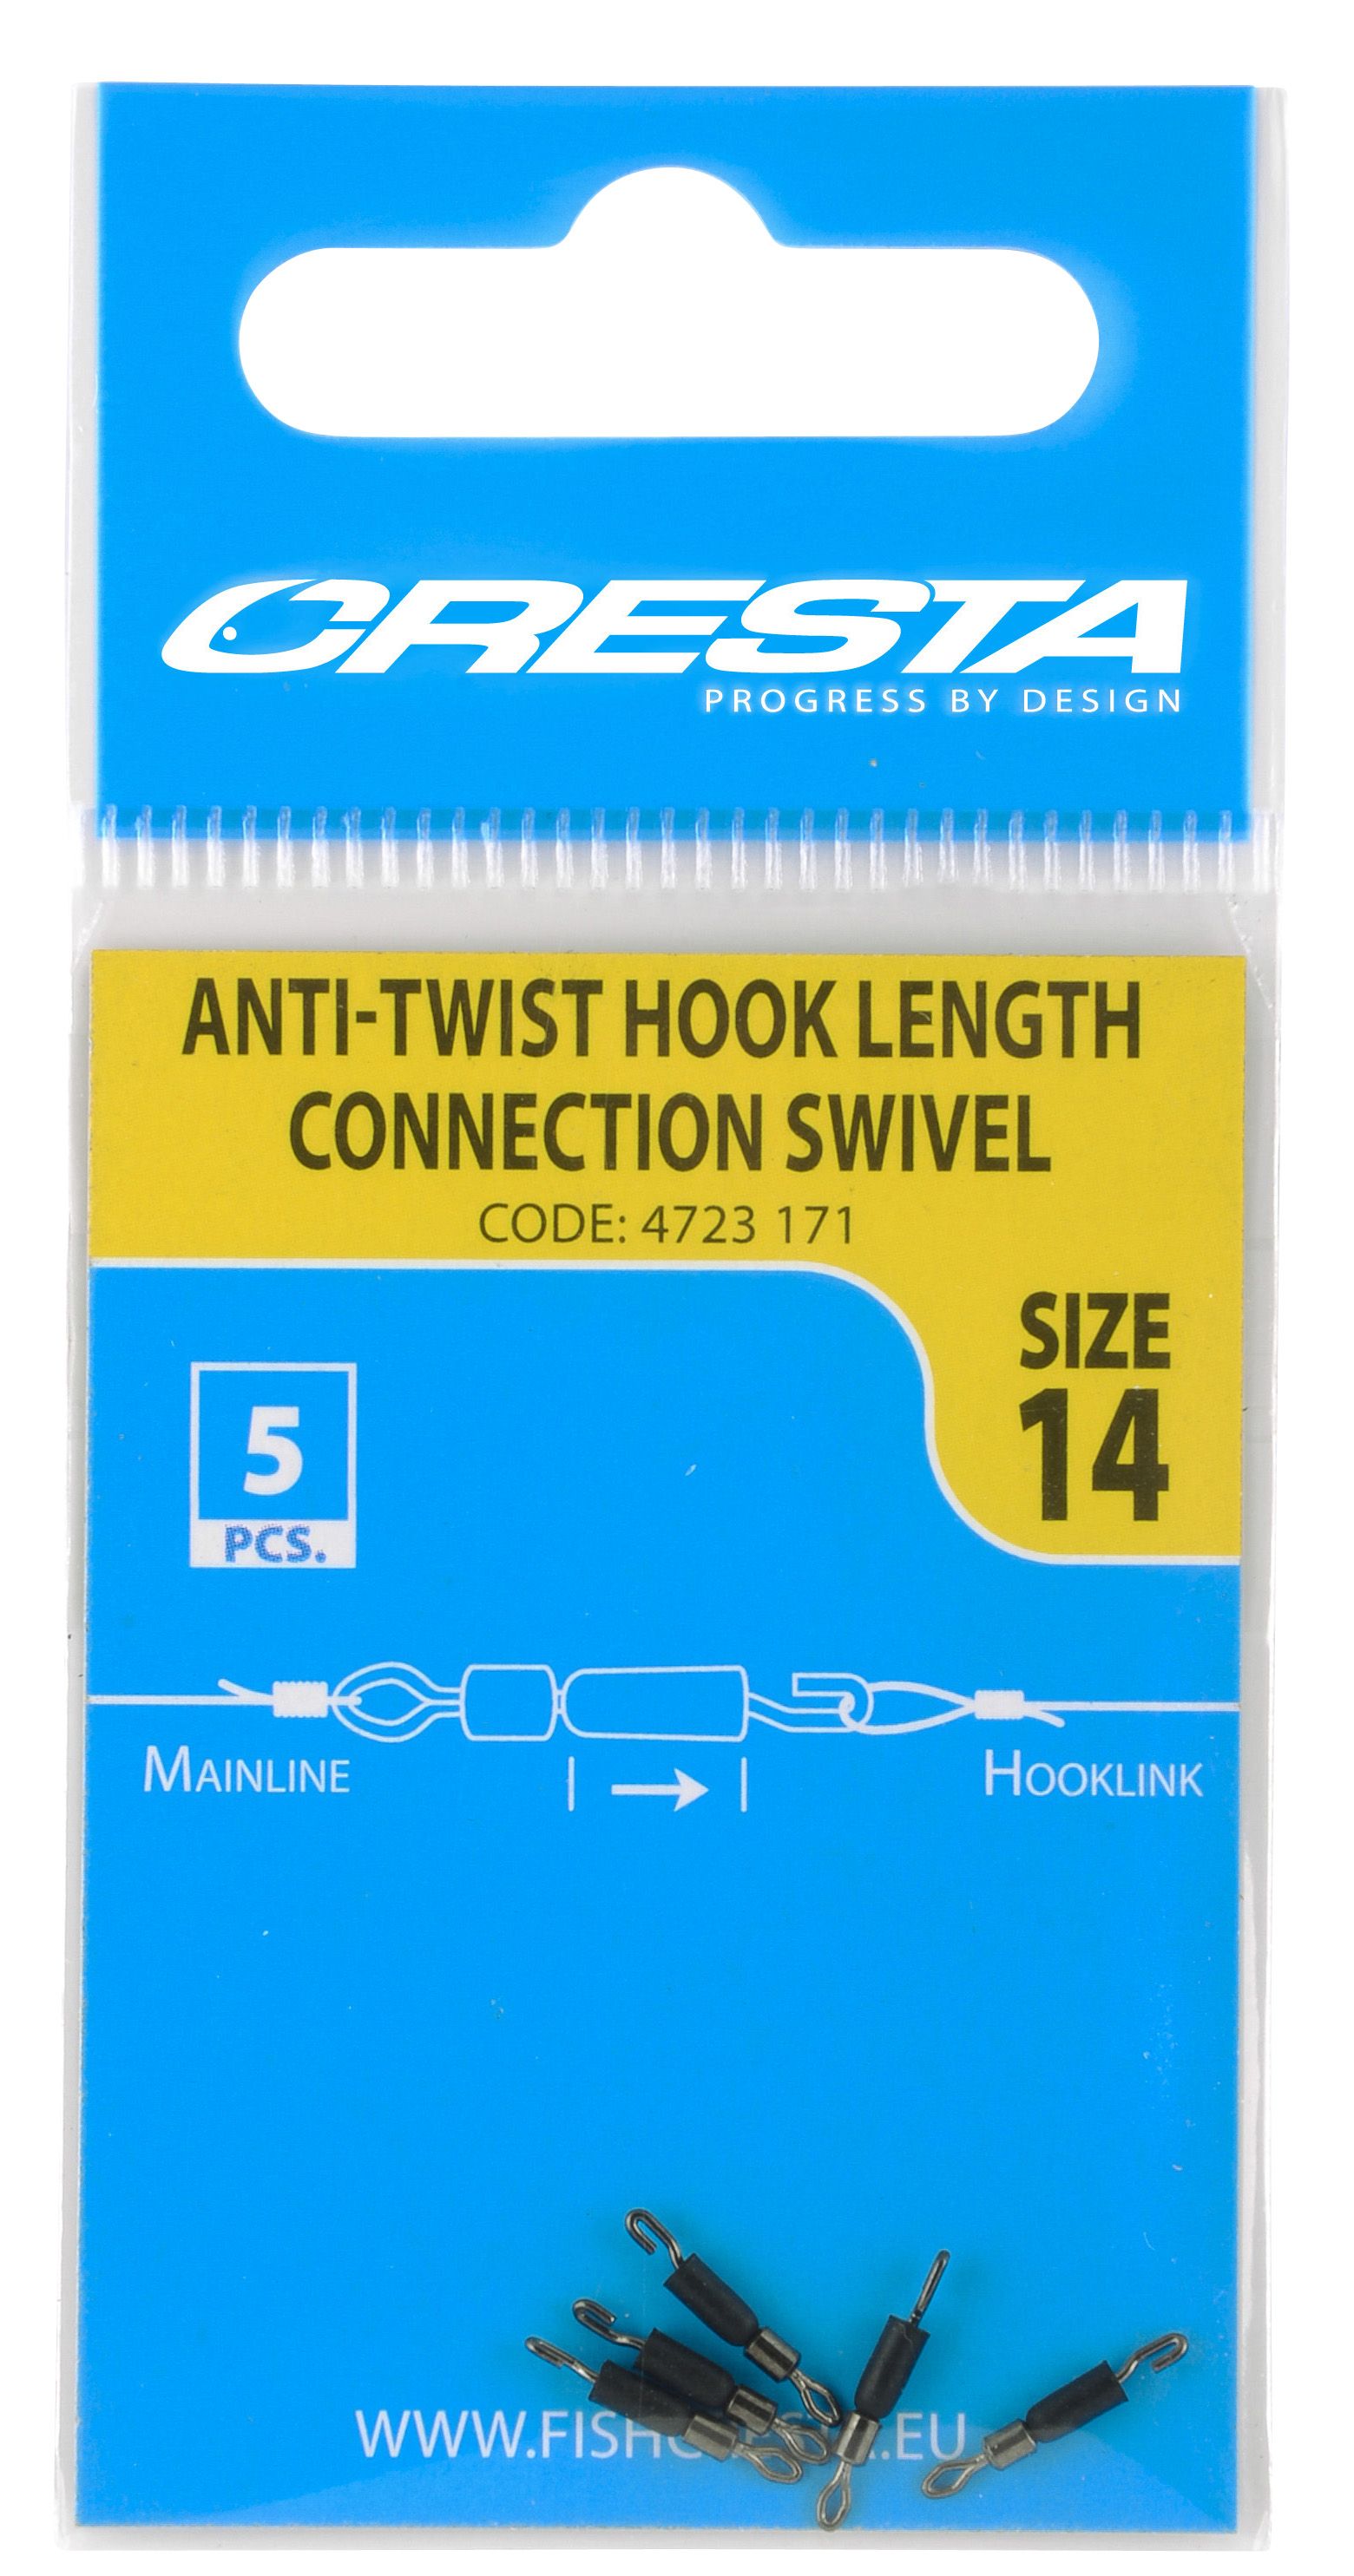 HOOKLENGTH CONNECTION SWIVEL - KM-Tackle